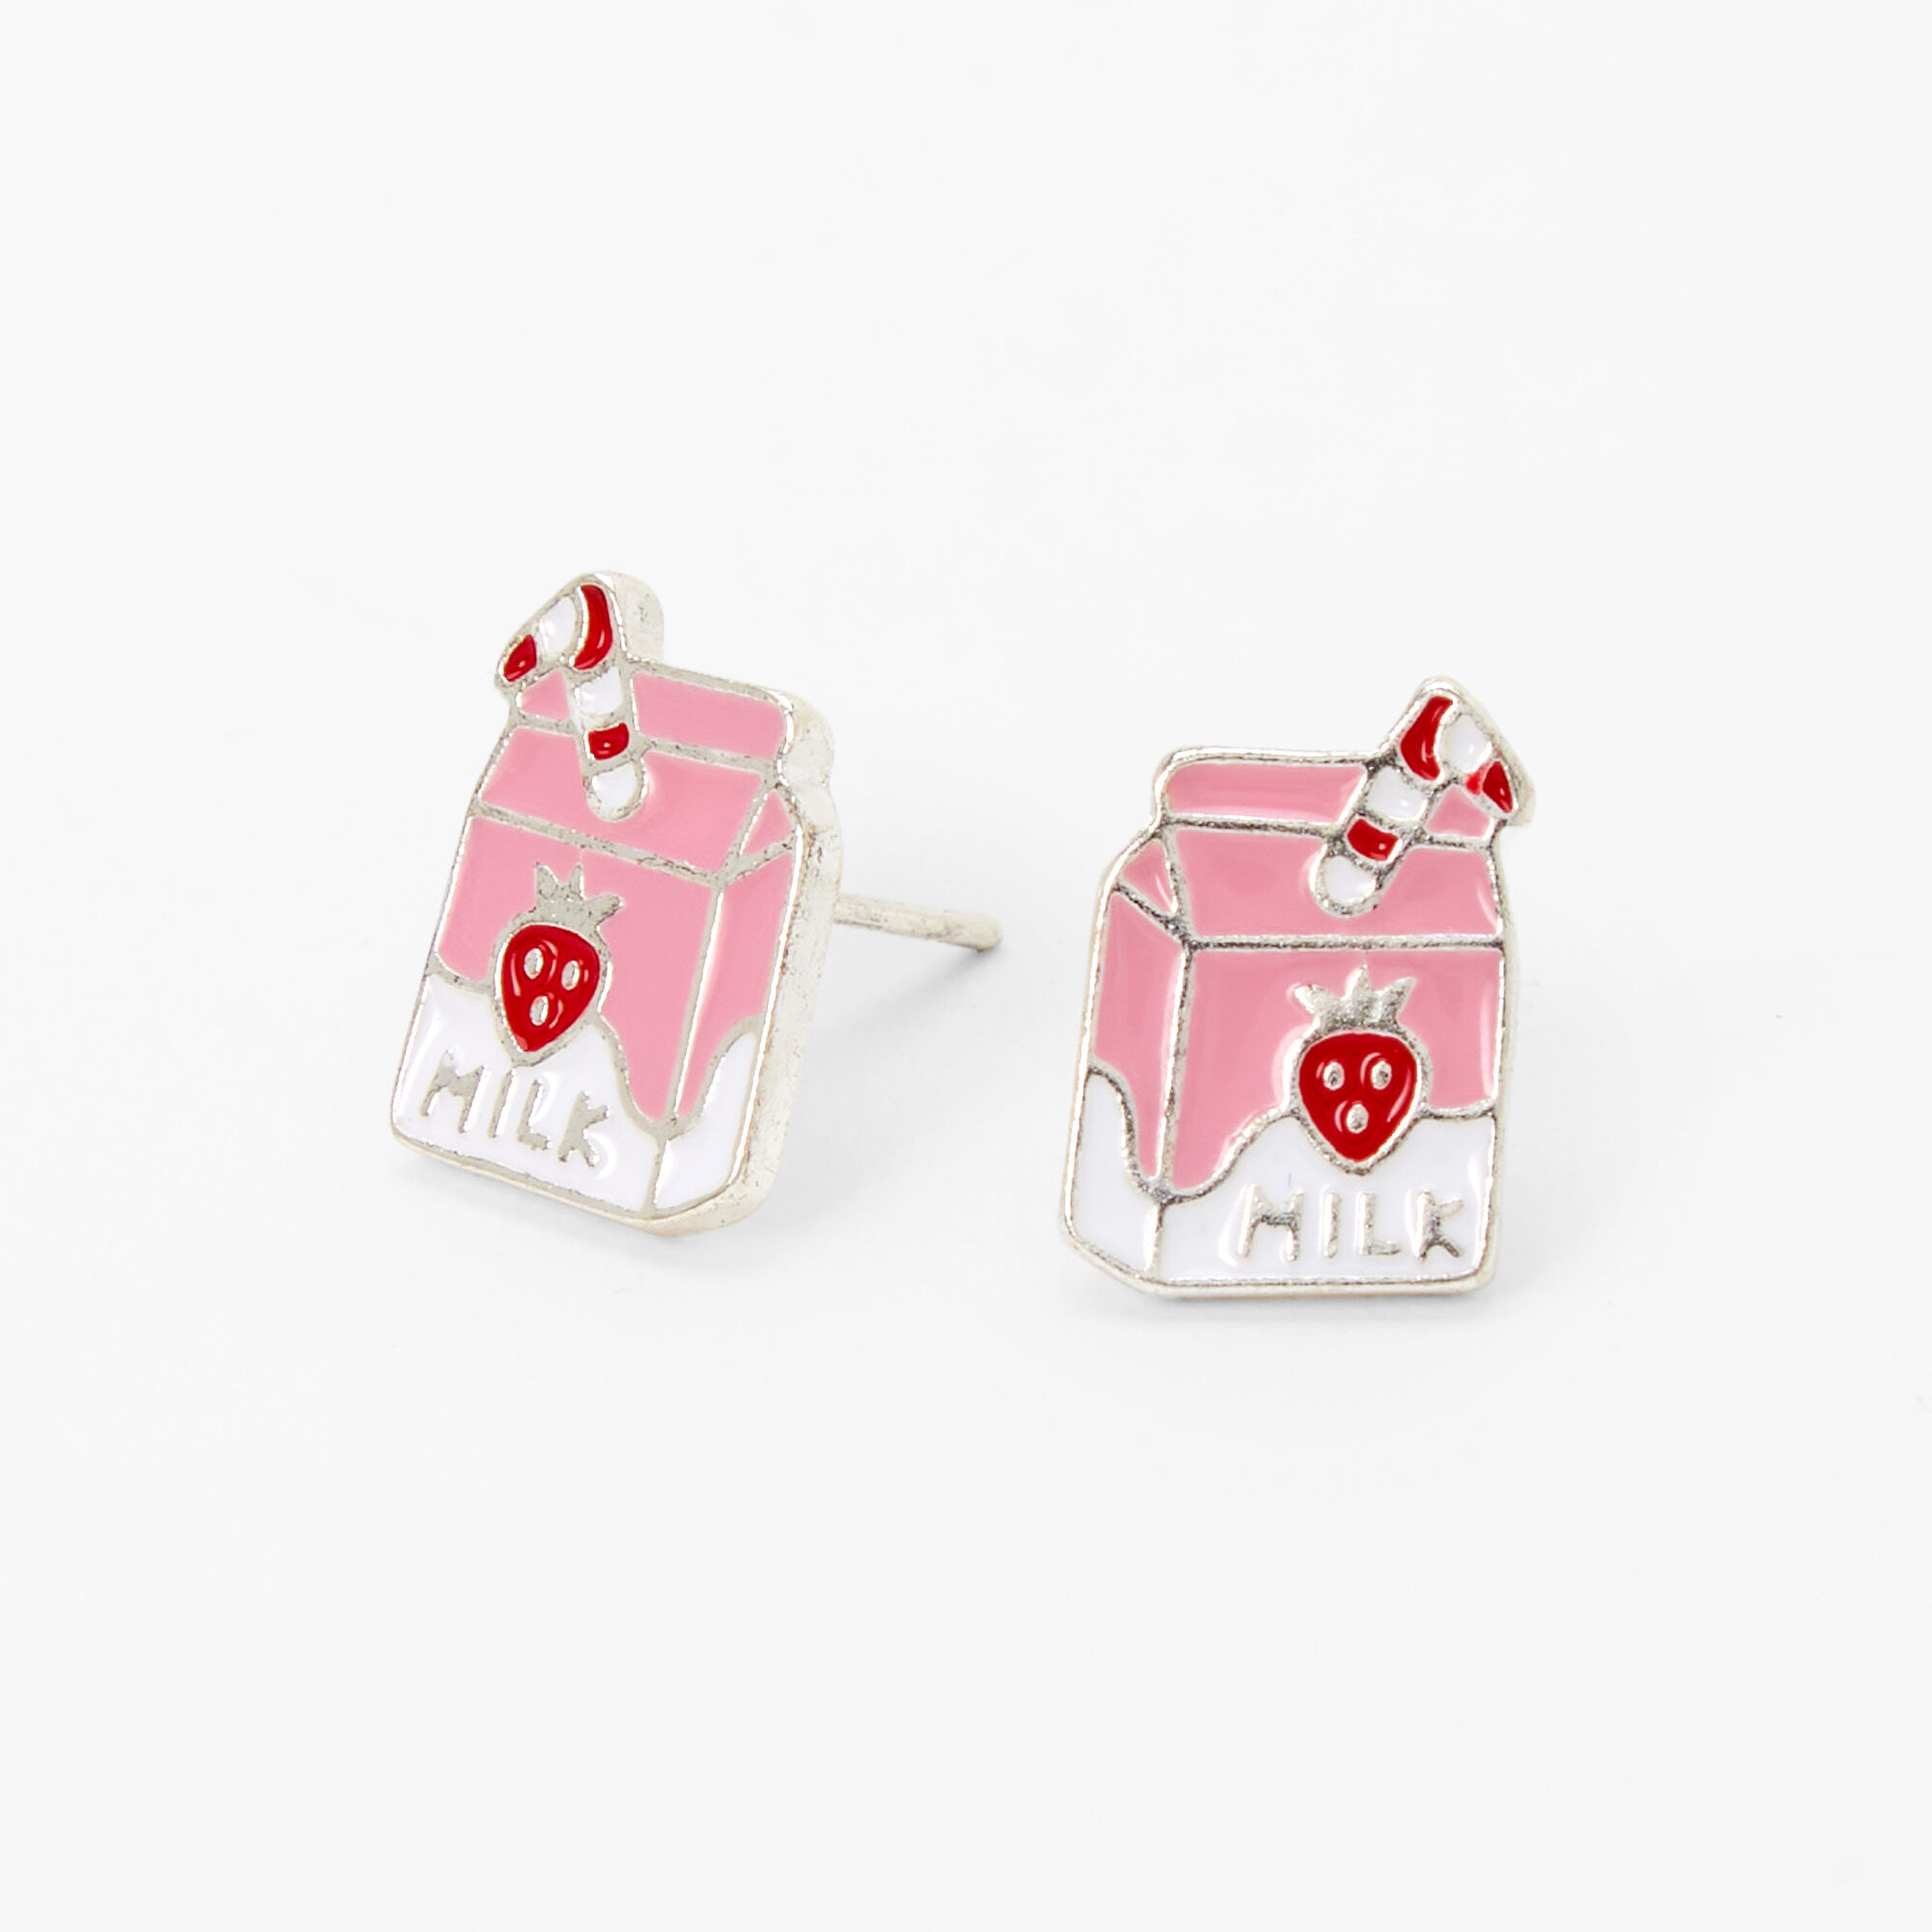 View Claires SilverTone Strawberry Milk Carton Stud Earrings Pink information